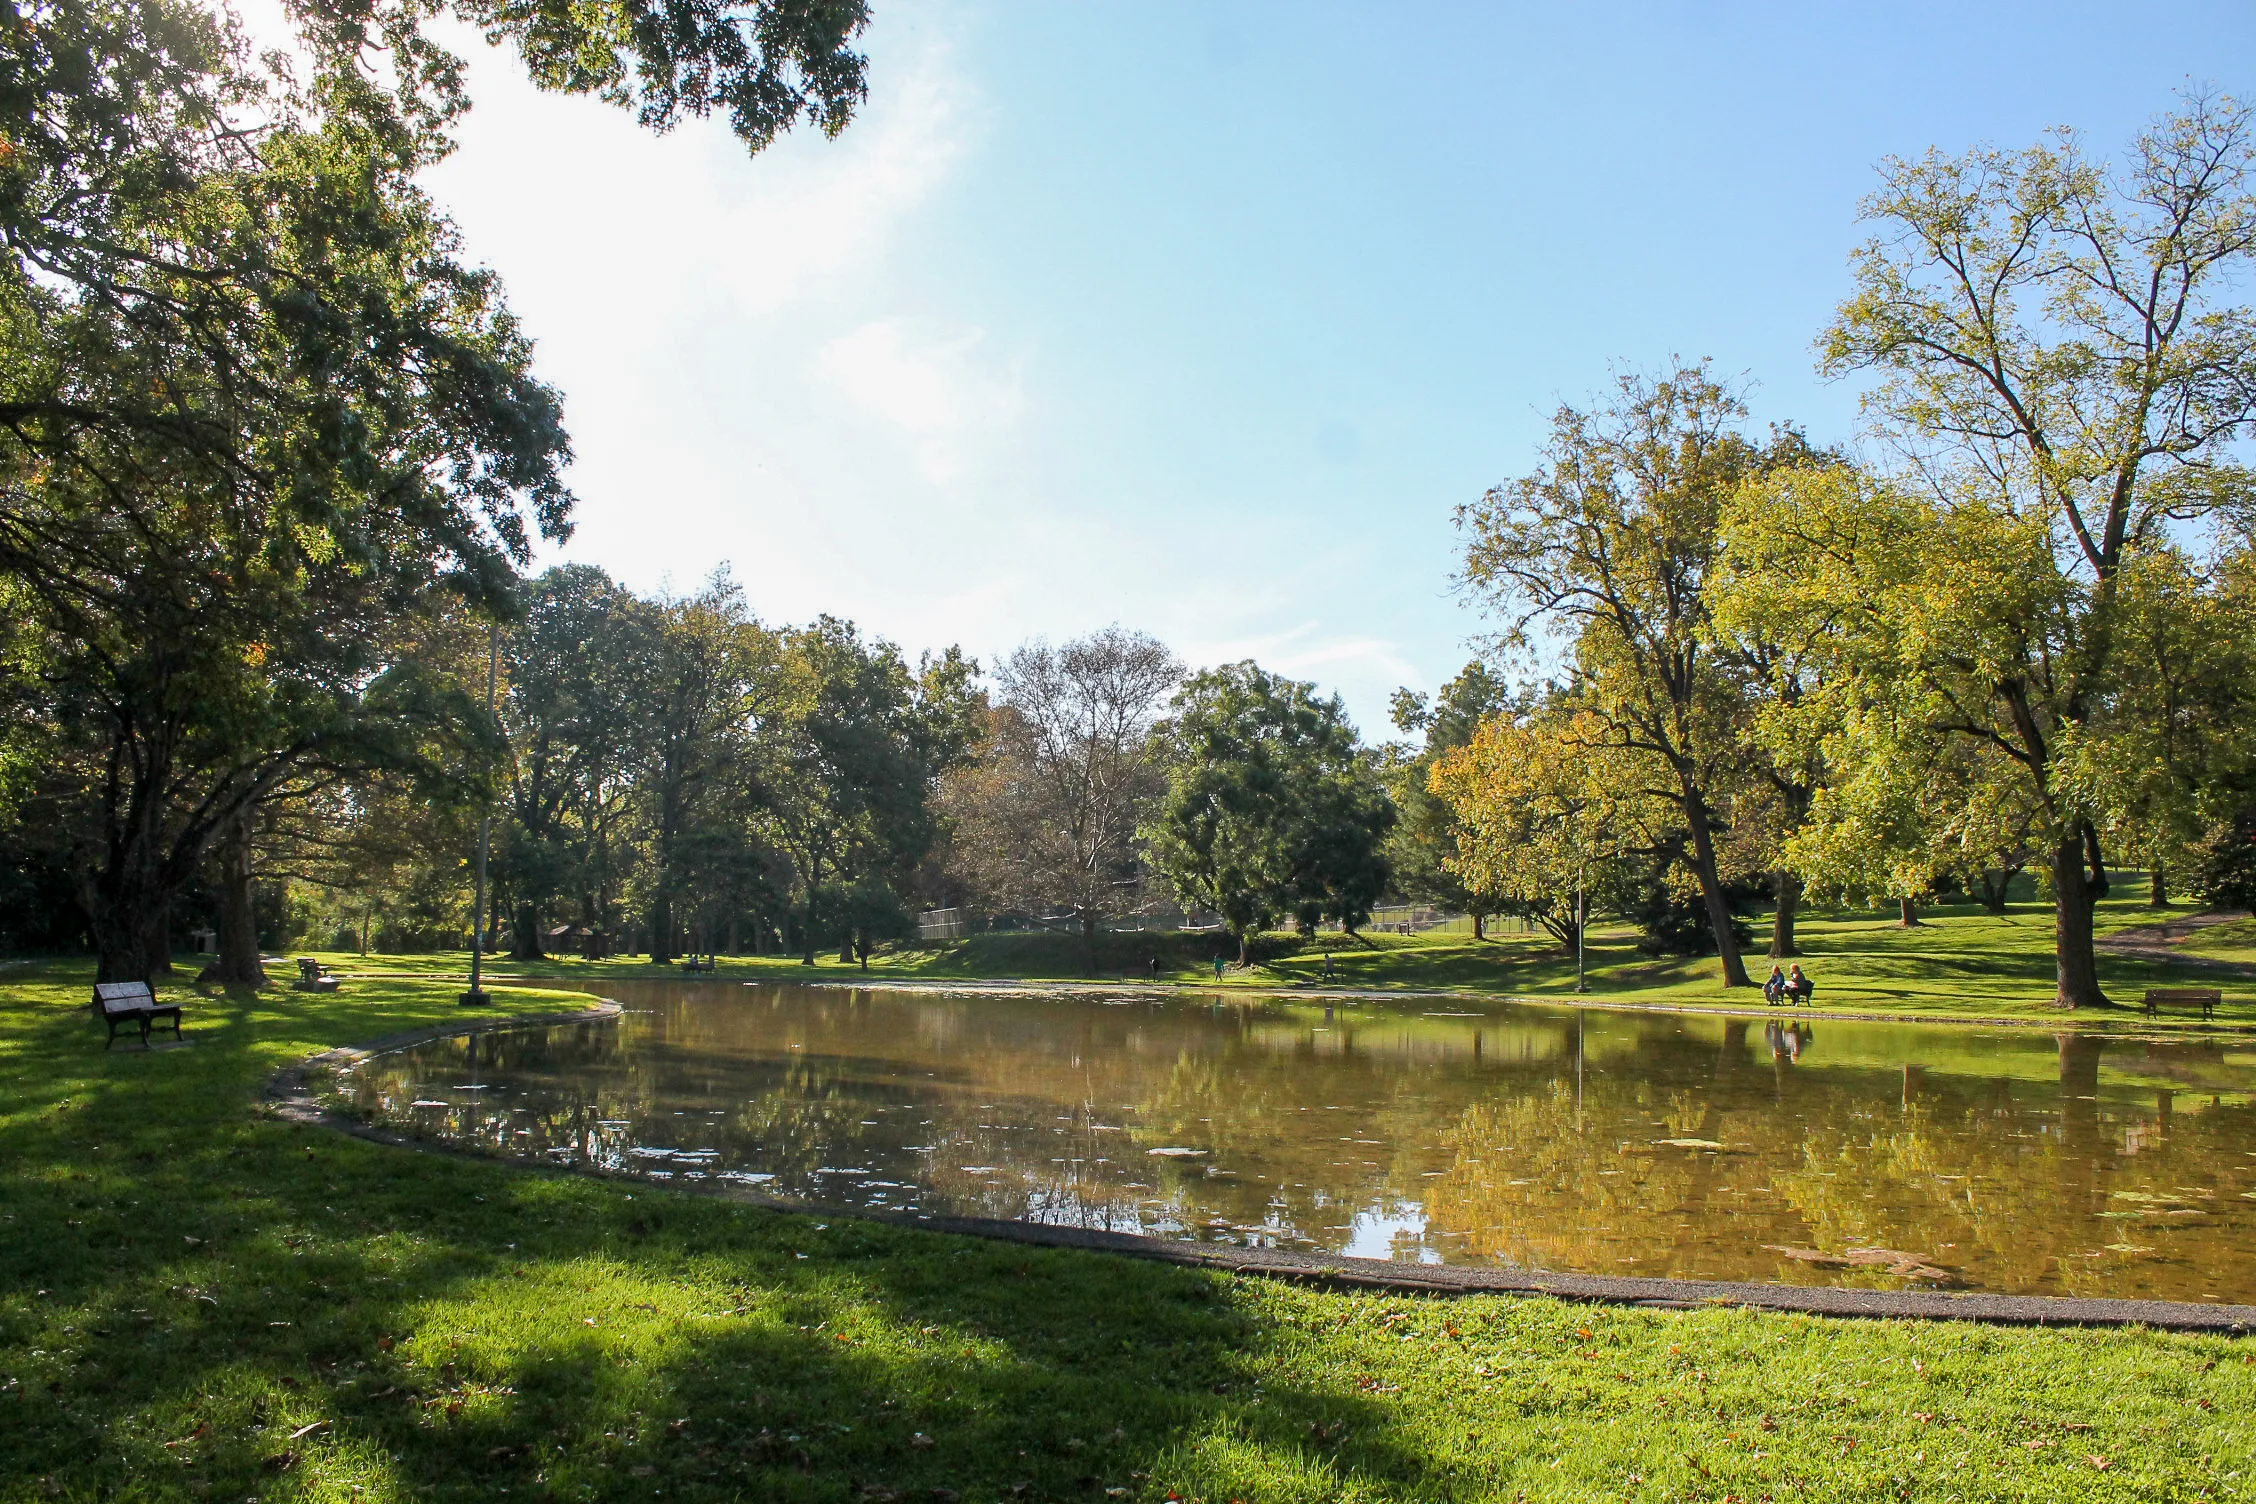 The pond at Wyomissing Park on a sunny fall day.